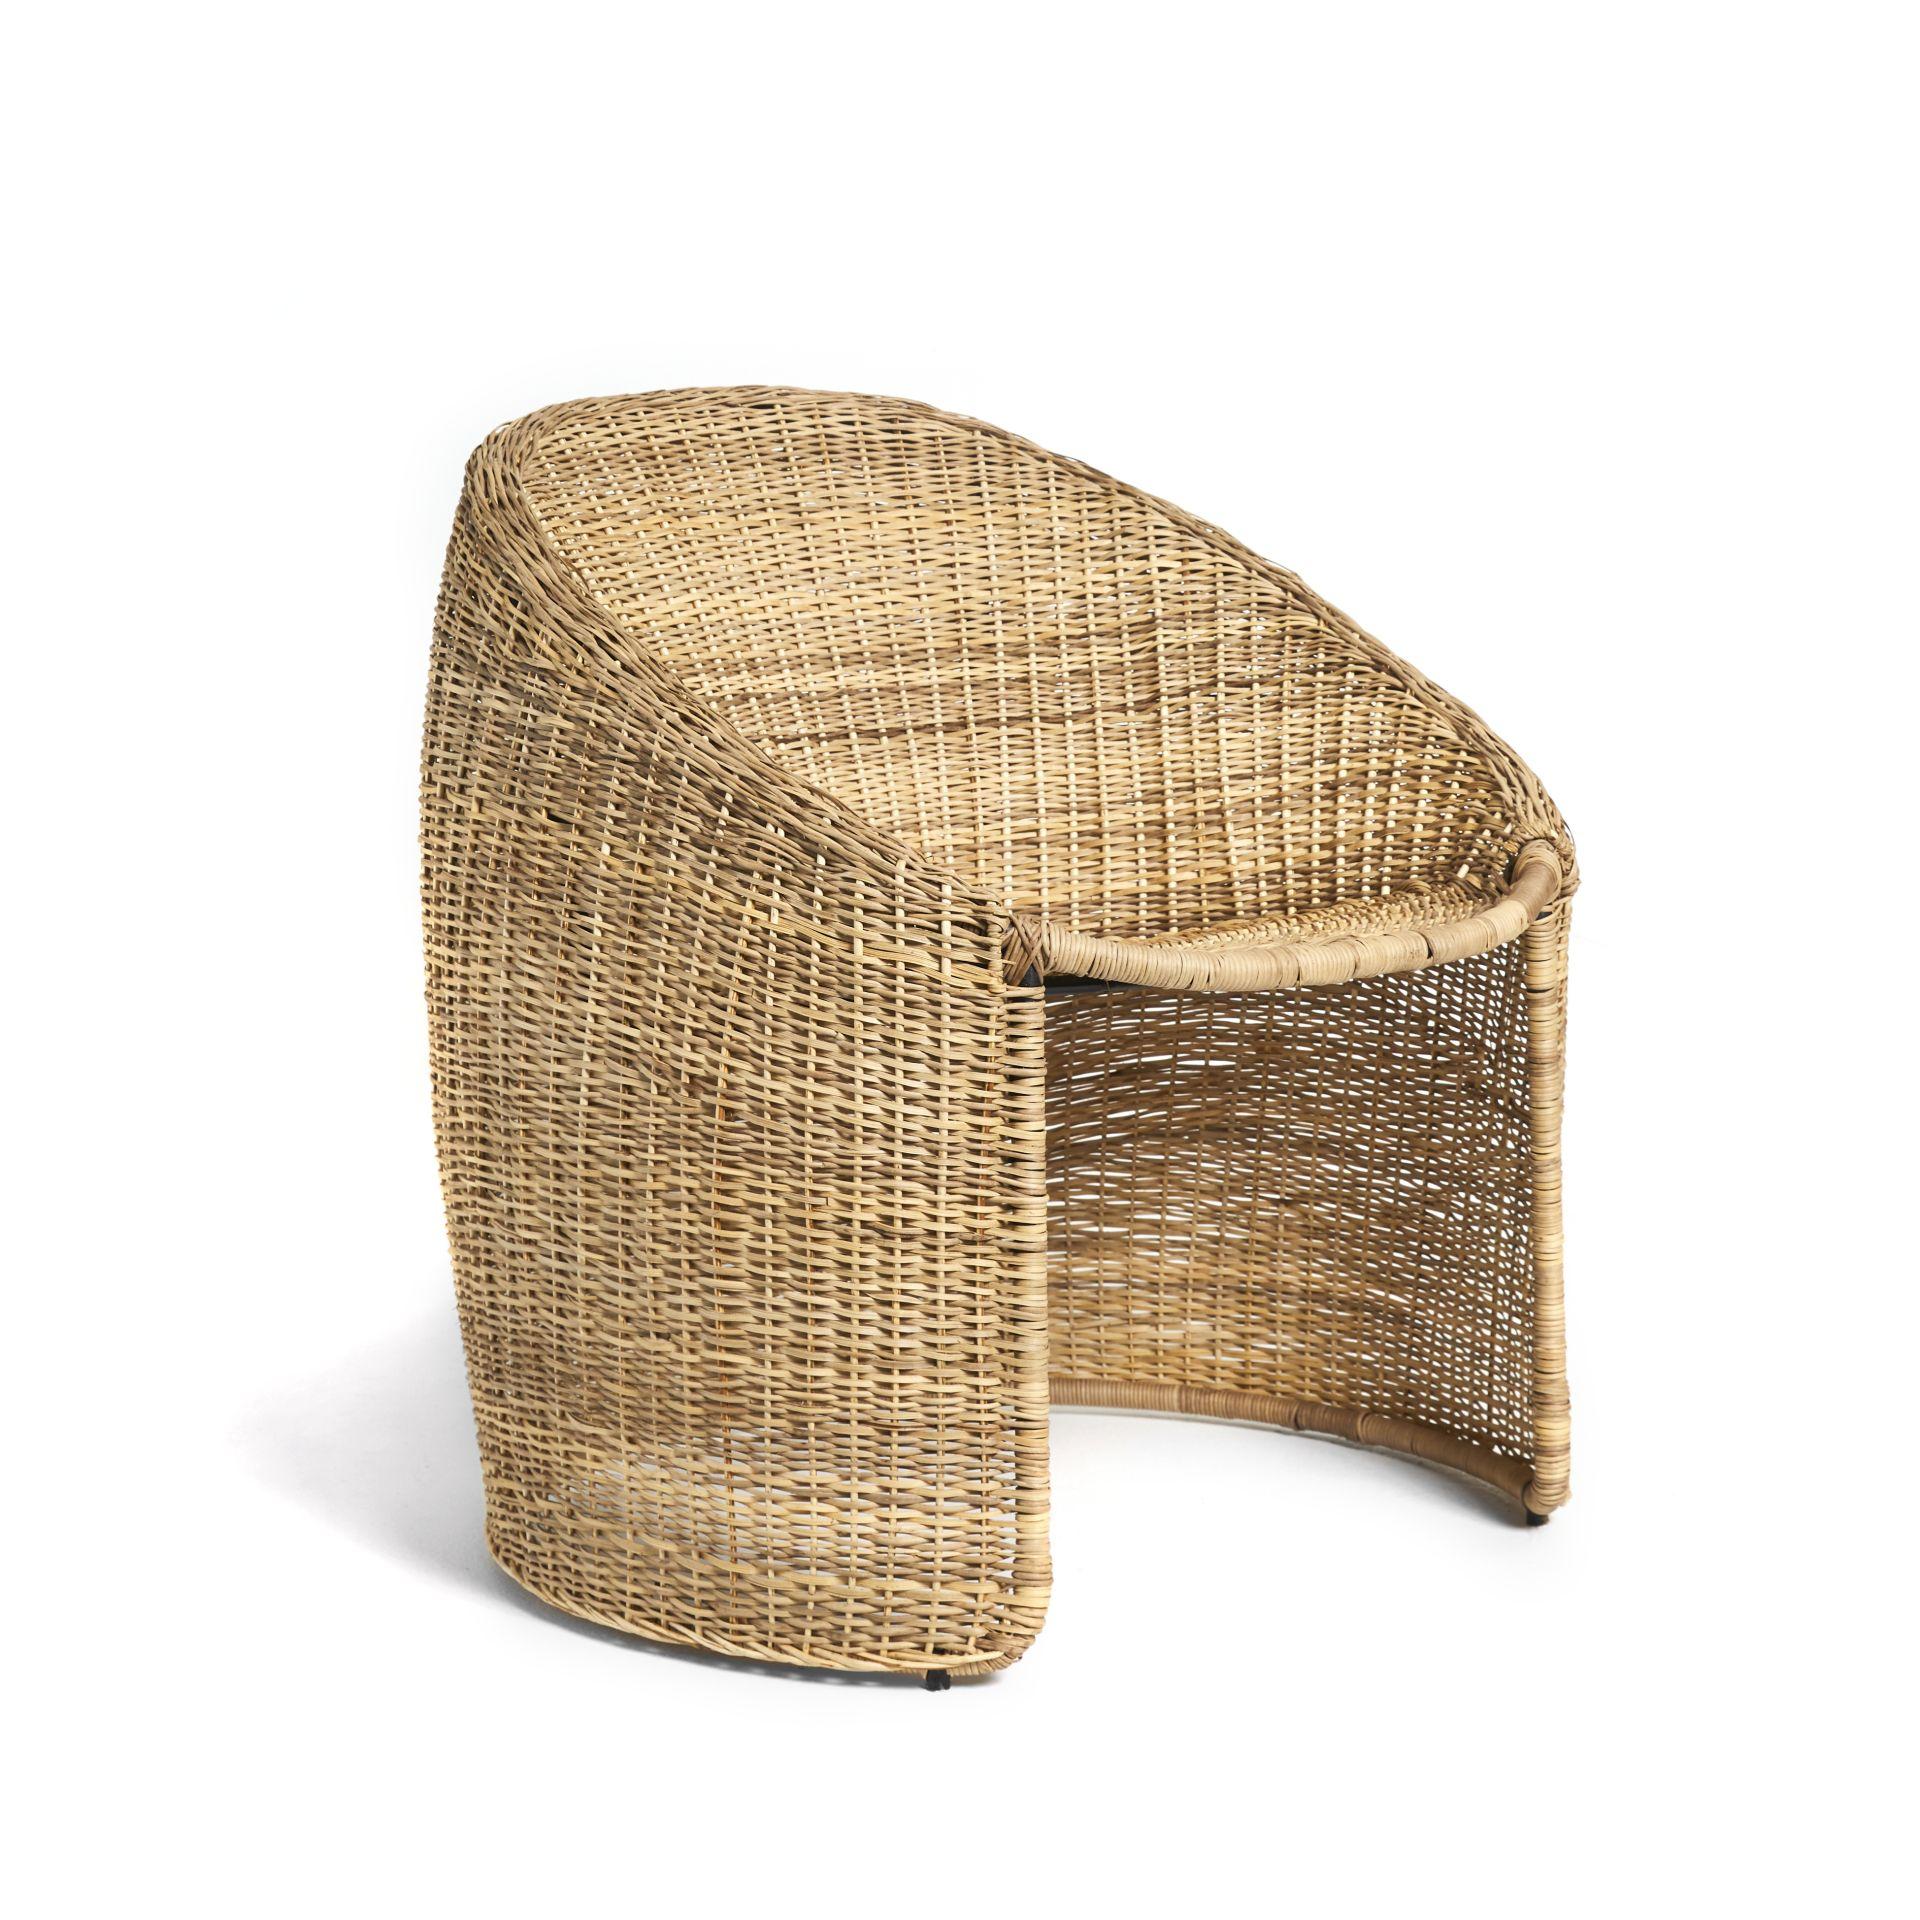 Ames introduces a new material to the popular Cartagenas furniture series from Sebastian Herkner: wicker. This natural material reinvents the chairs of the series, giving them a warm and calm presence. In Colombia, there’s a long history of using